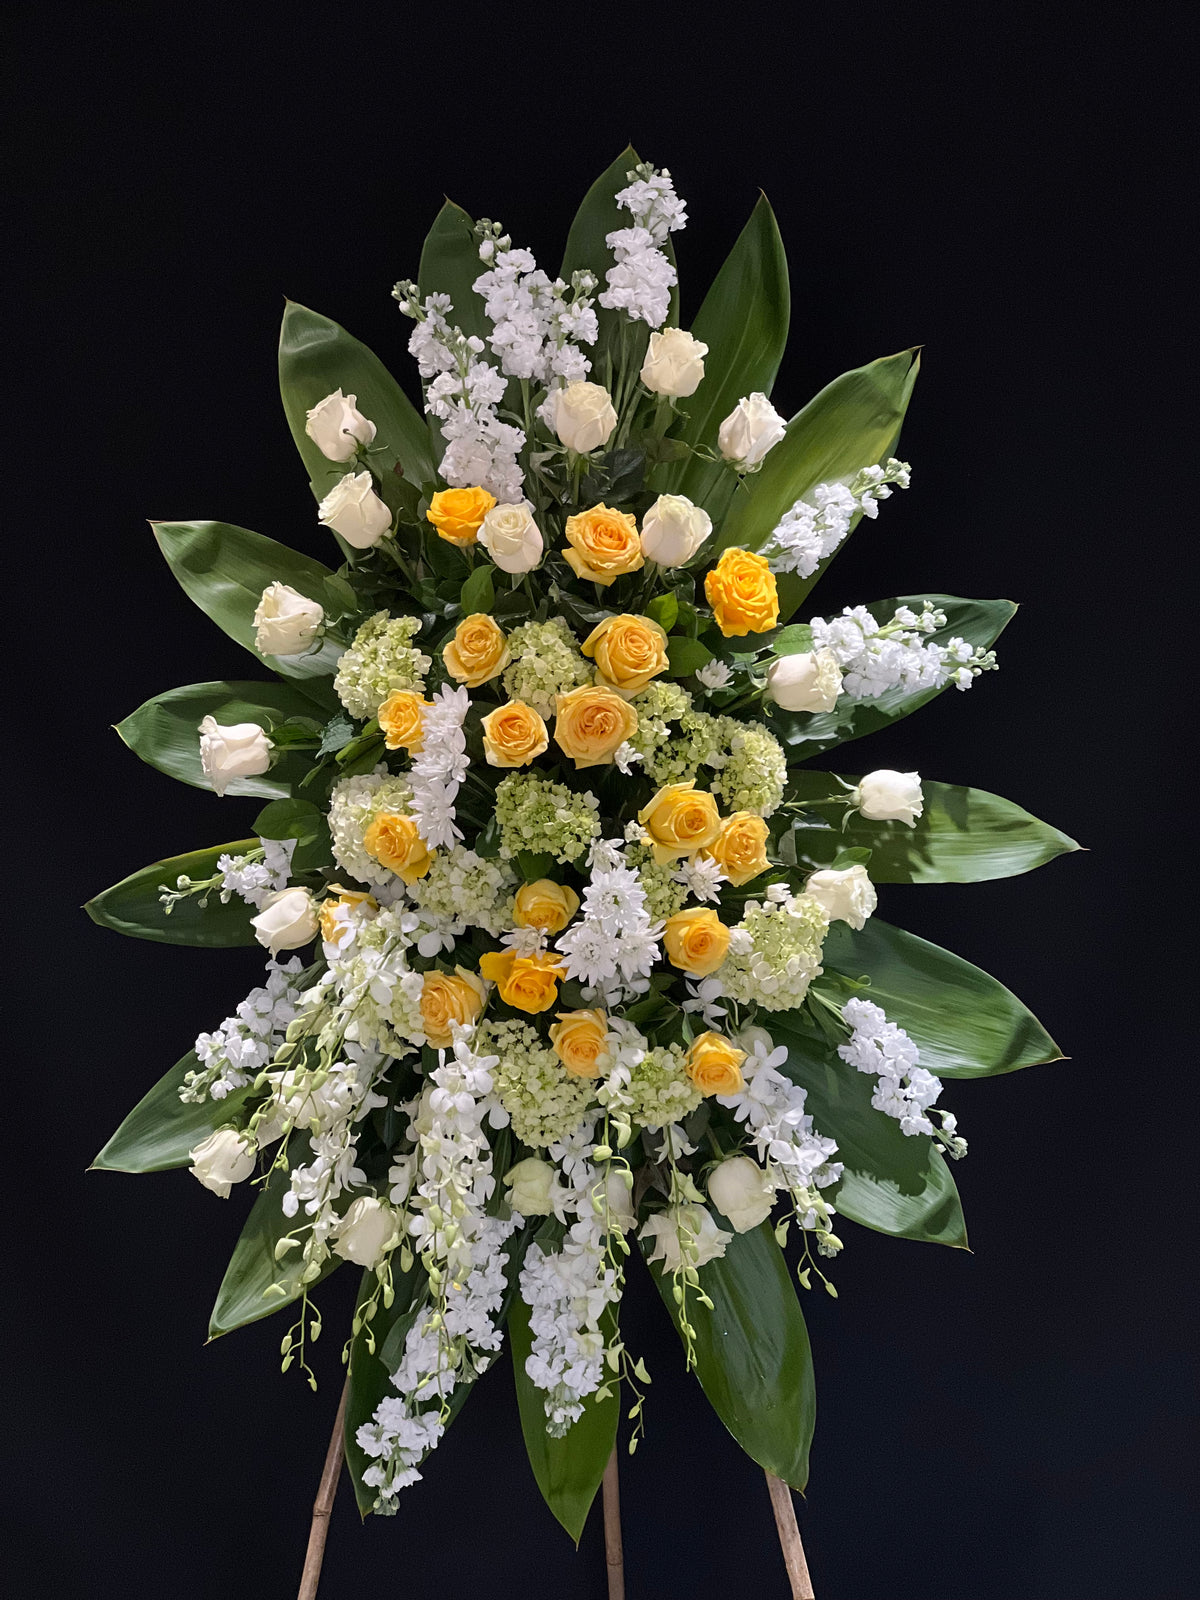 A serene standing floral spray in yellow and white, featuring stocks, roses, dendrobium orchids, hydrangeas, and daisies. An elegant floral tribute from Yonge Florist, offering comfort and sympathy for funeral and memorial services. Local GTA delivery to funeral homes, churches, chapels, and mosques available